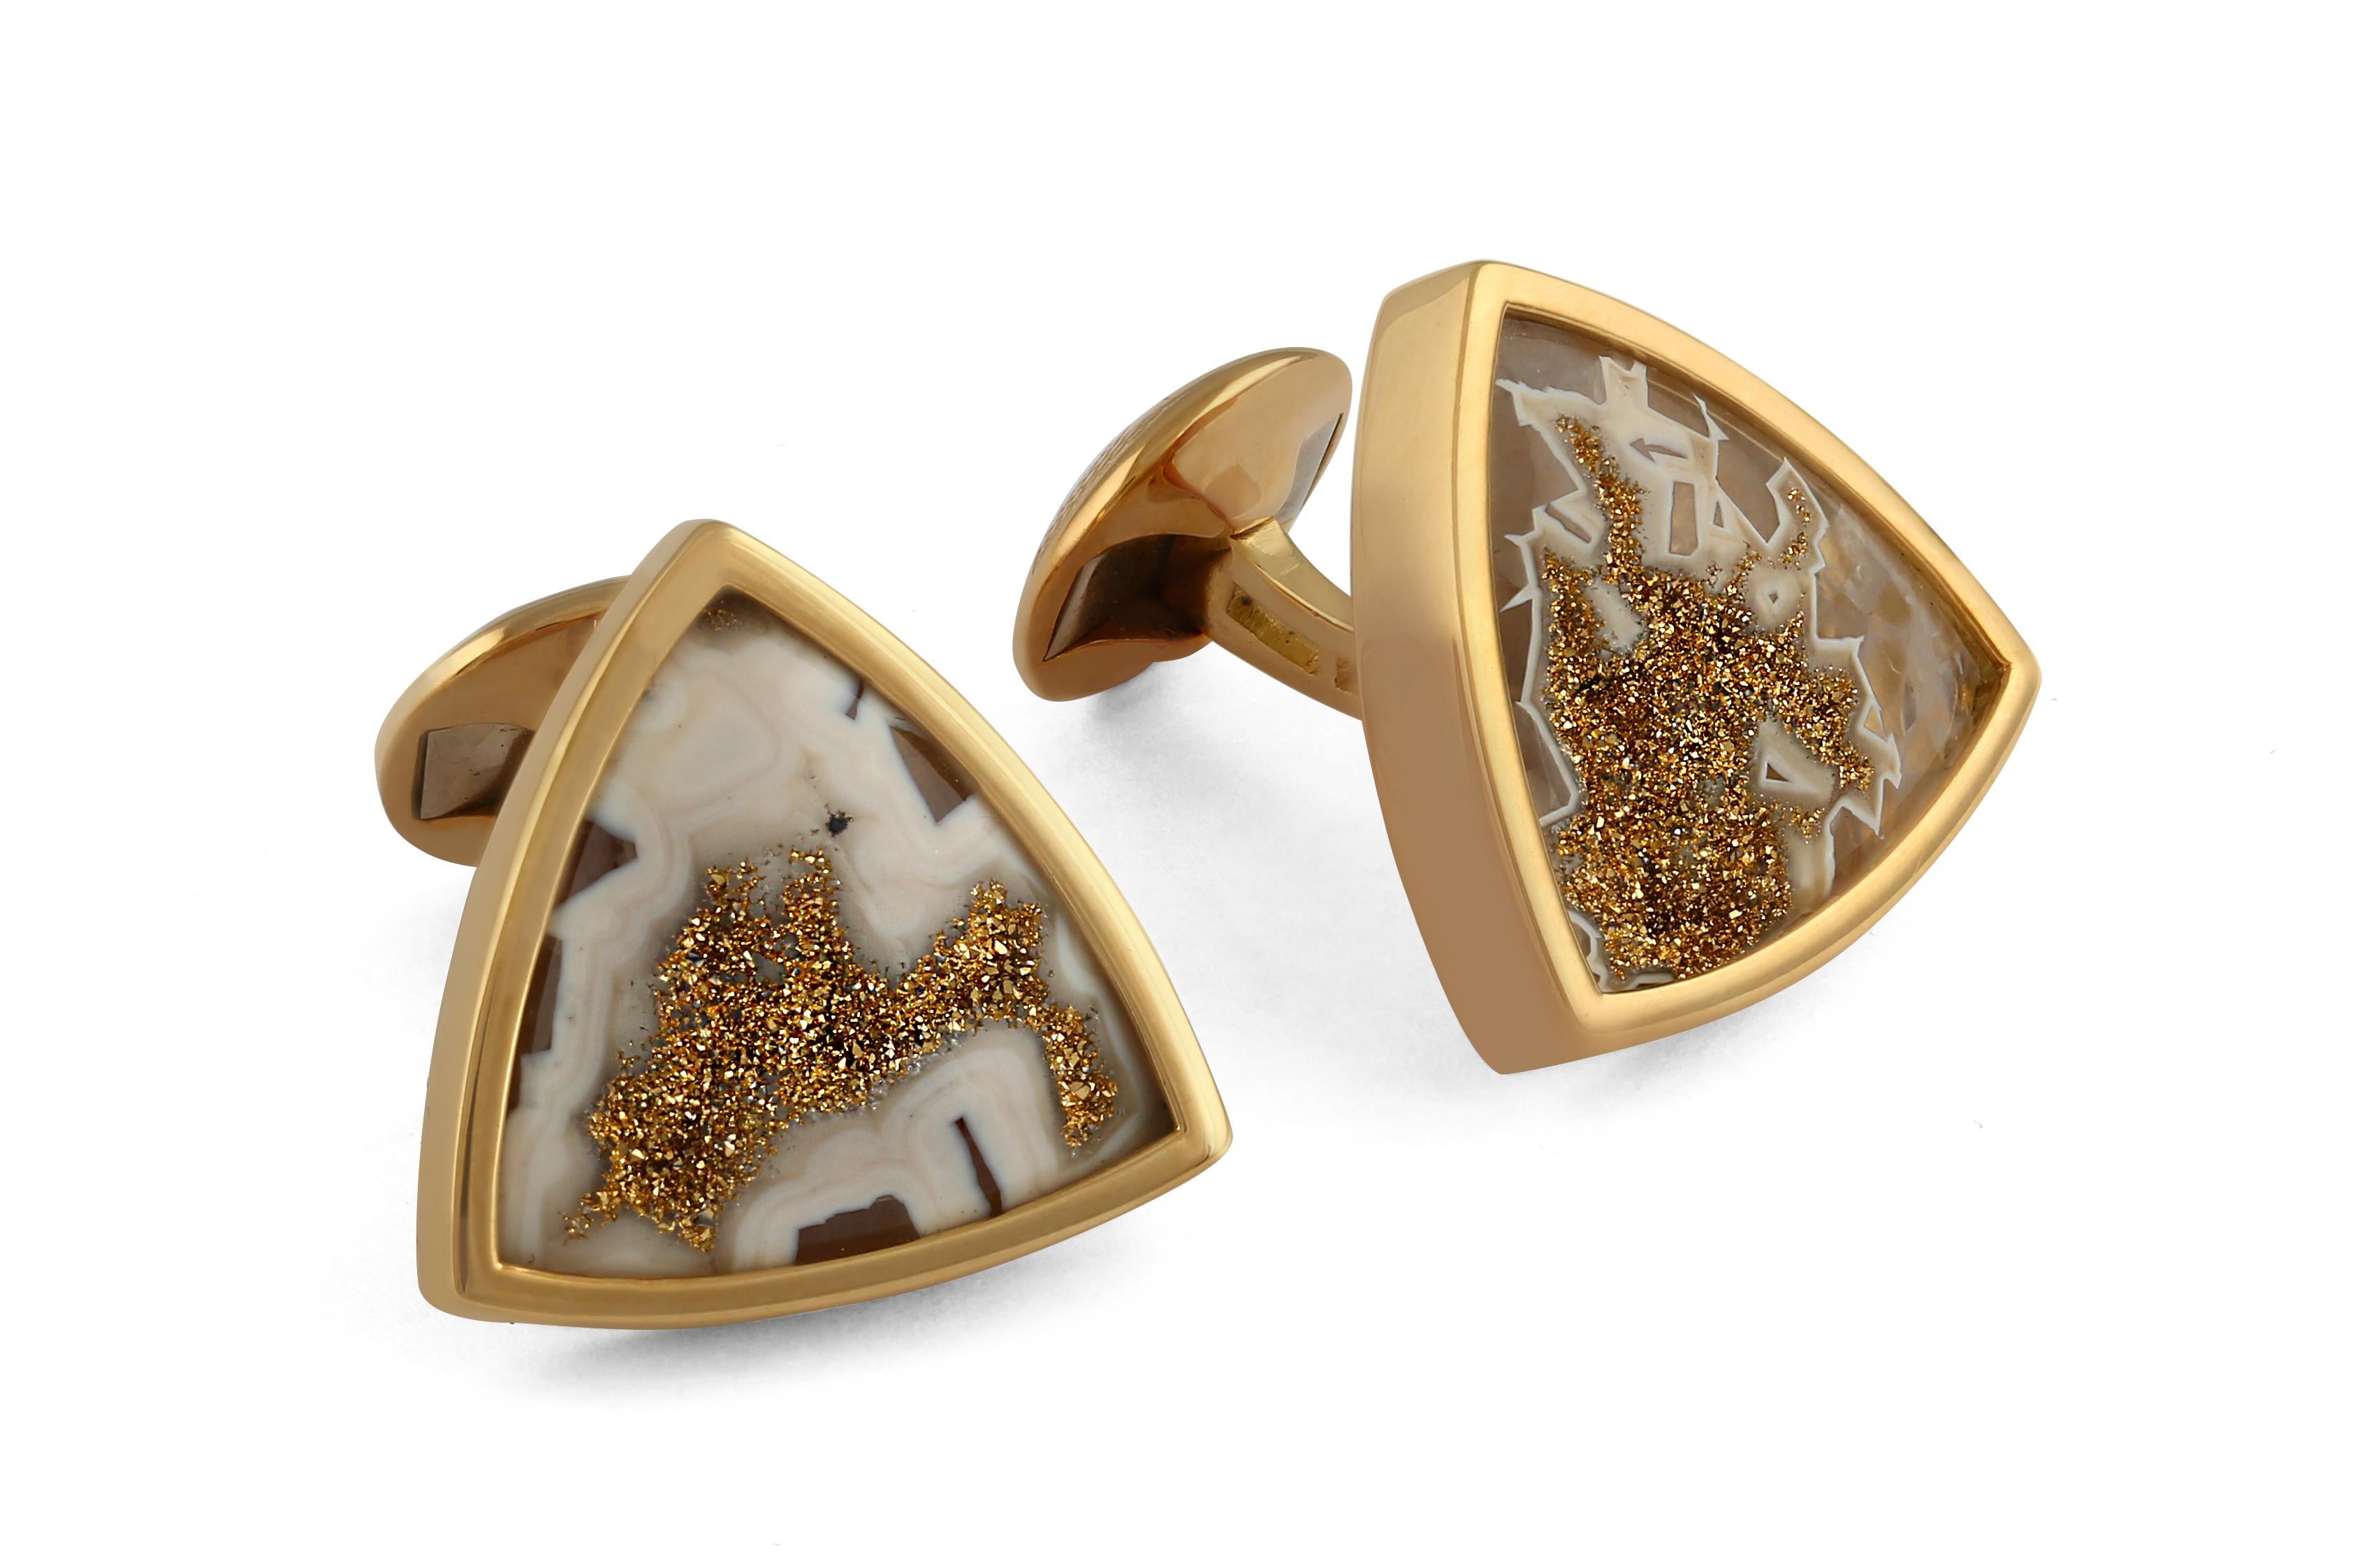 Our stunning 18k yellow gold triangle bezel brings out the warmth of our unique Gold Valley Drusy stones. Make these geometric Cufflinks a pair to remember.